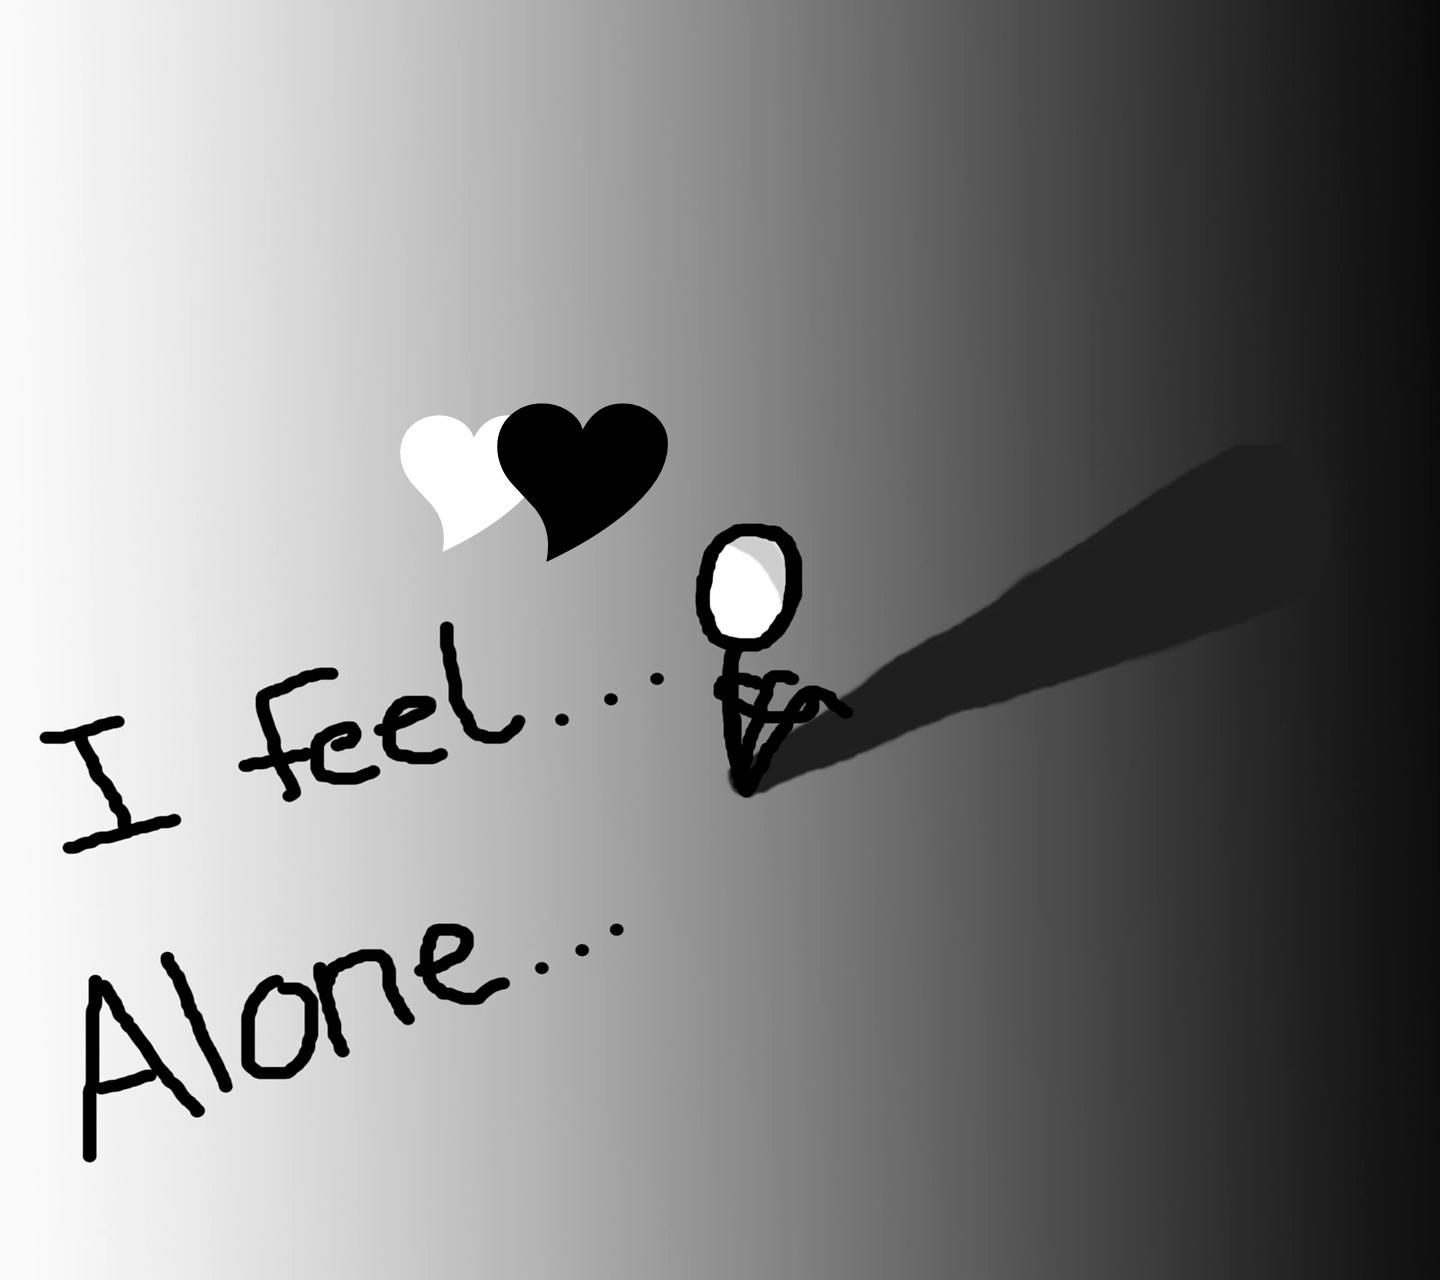 I am alone s on